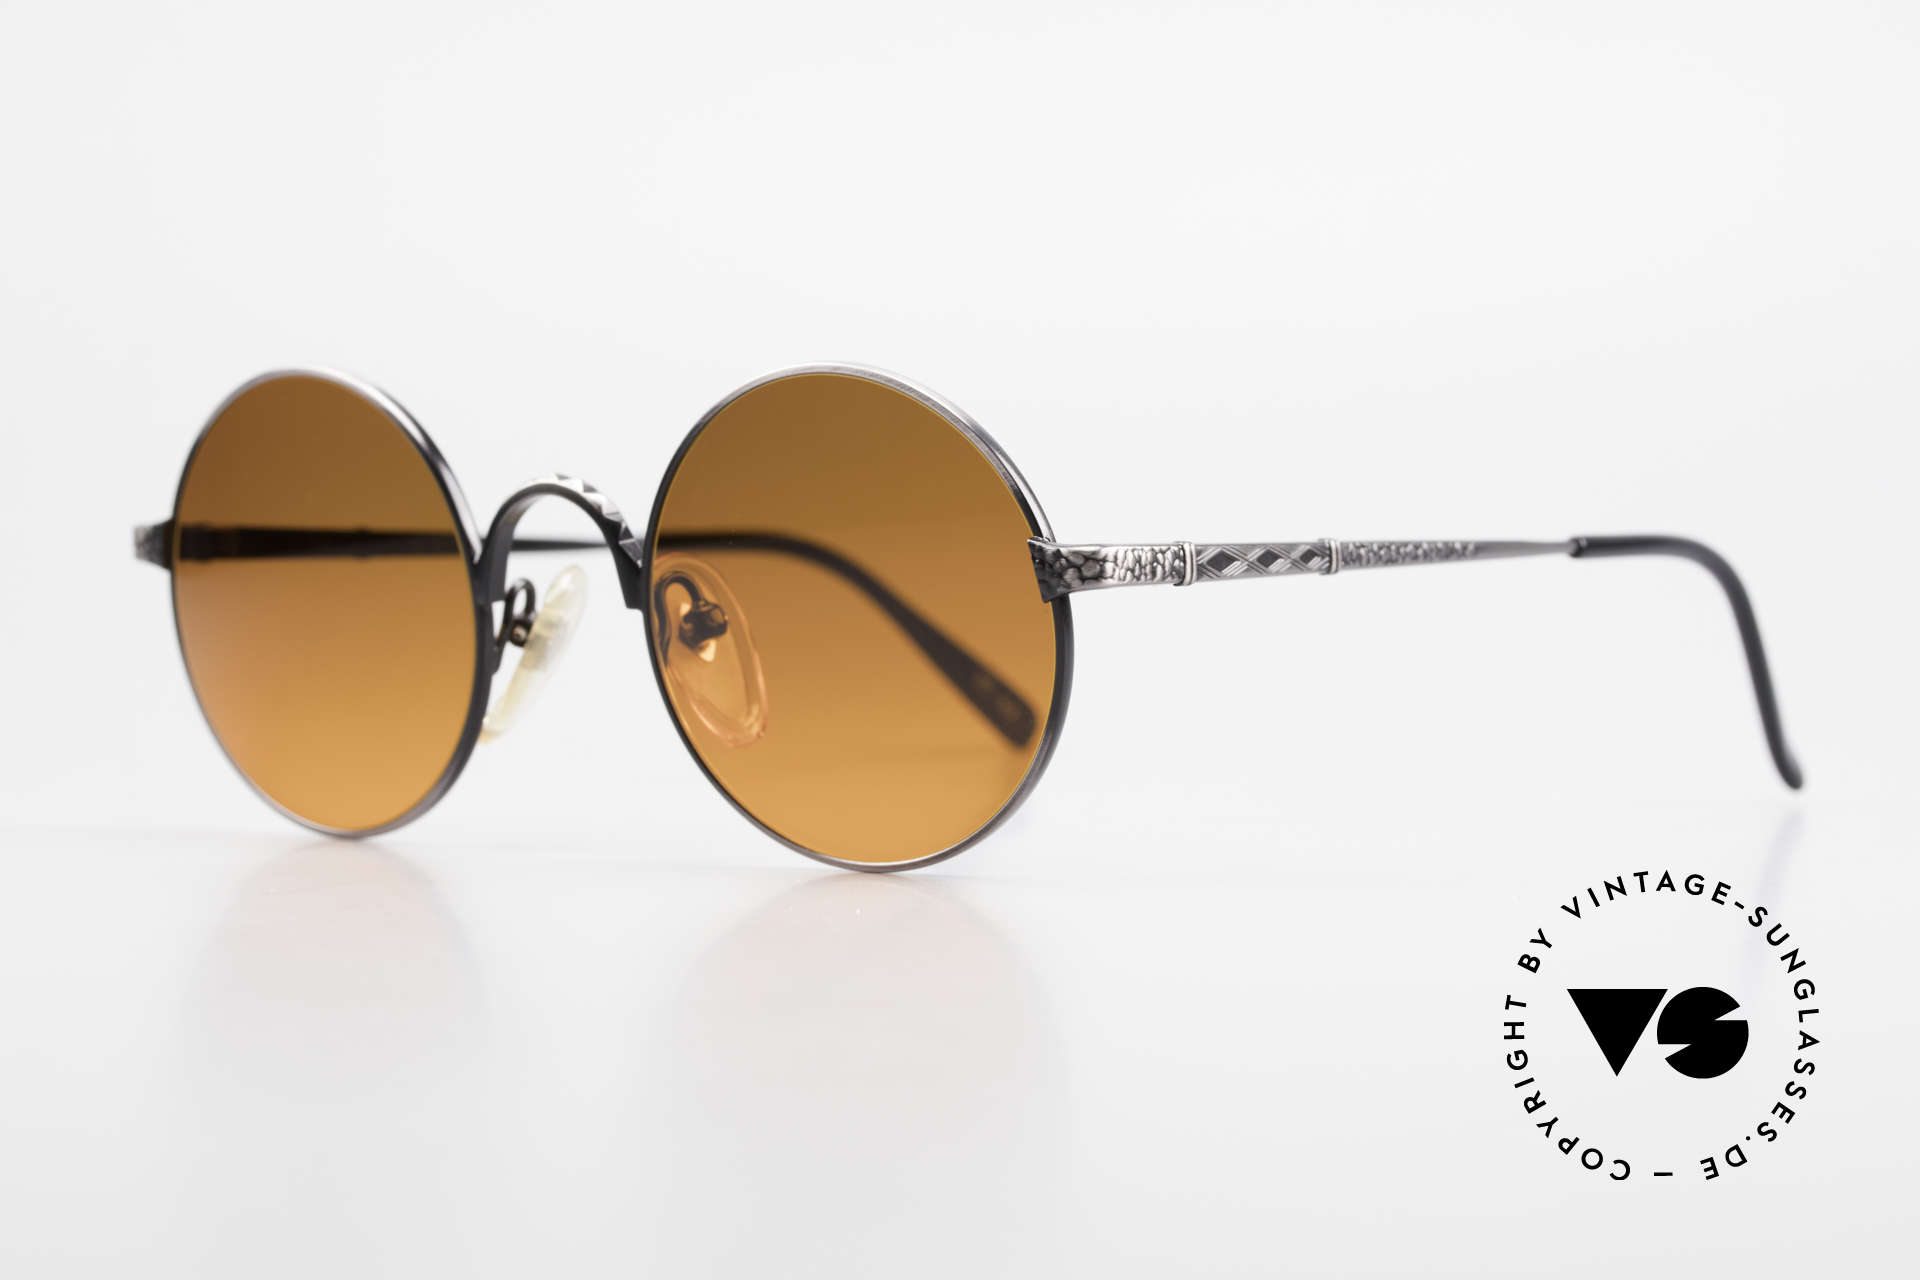 Jean Paul Gaultier 55-9671 Round 90's JPG Sunglasses, 'smoke silver' finish and SUNSET sun lenses, Made for Men and Women